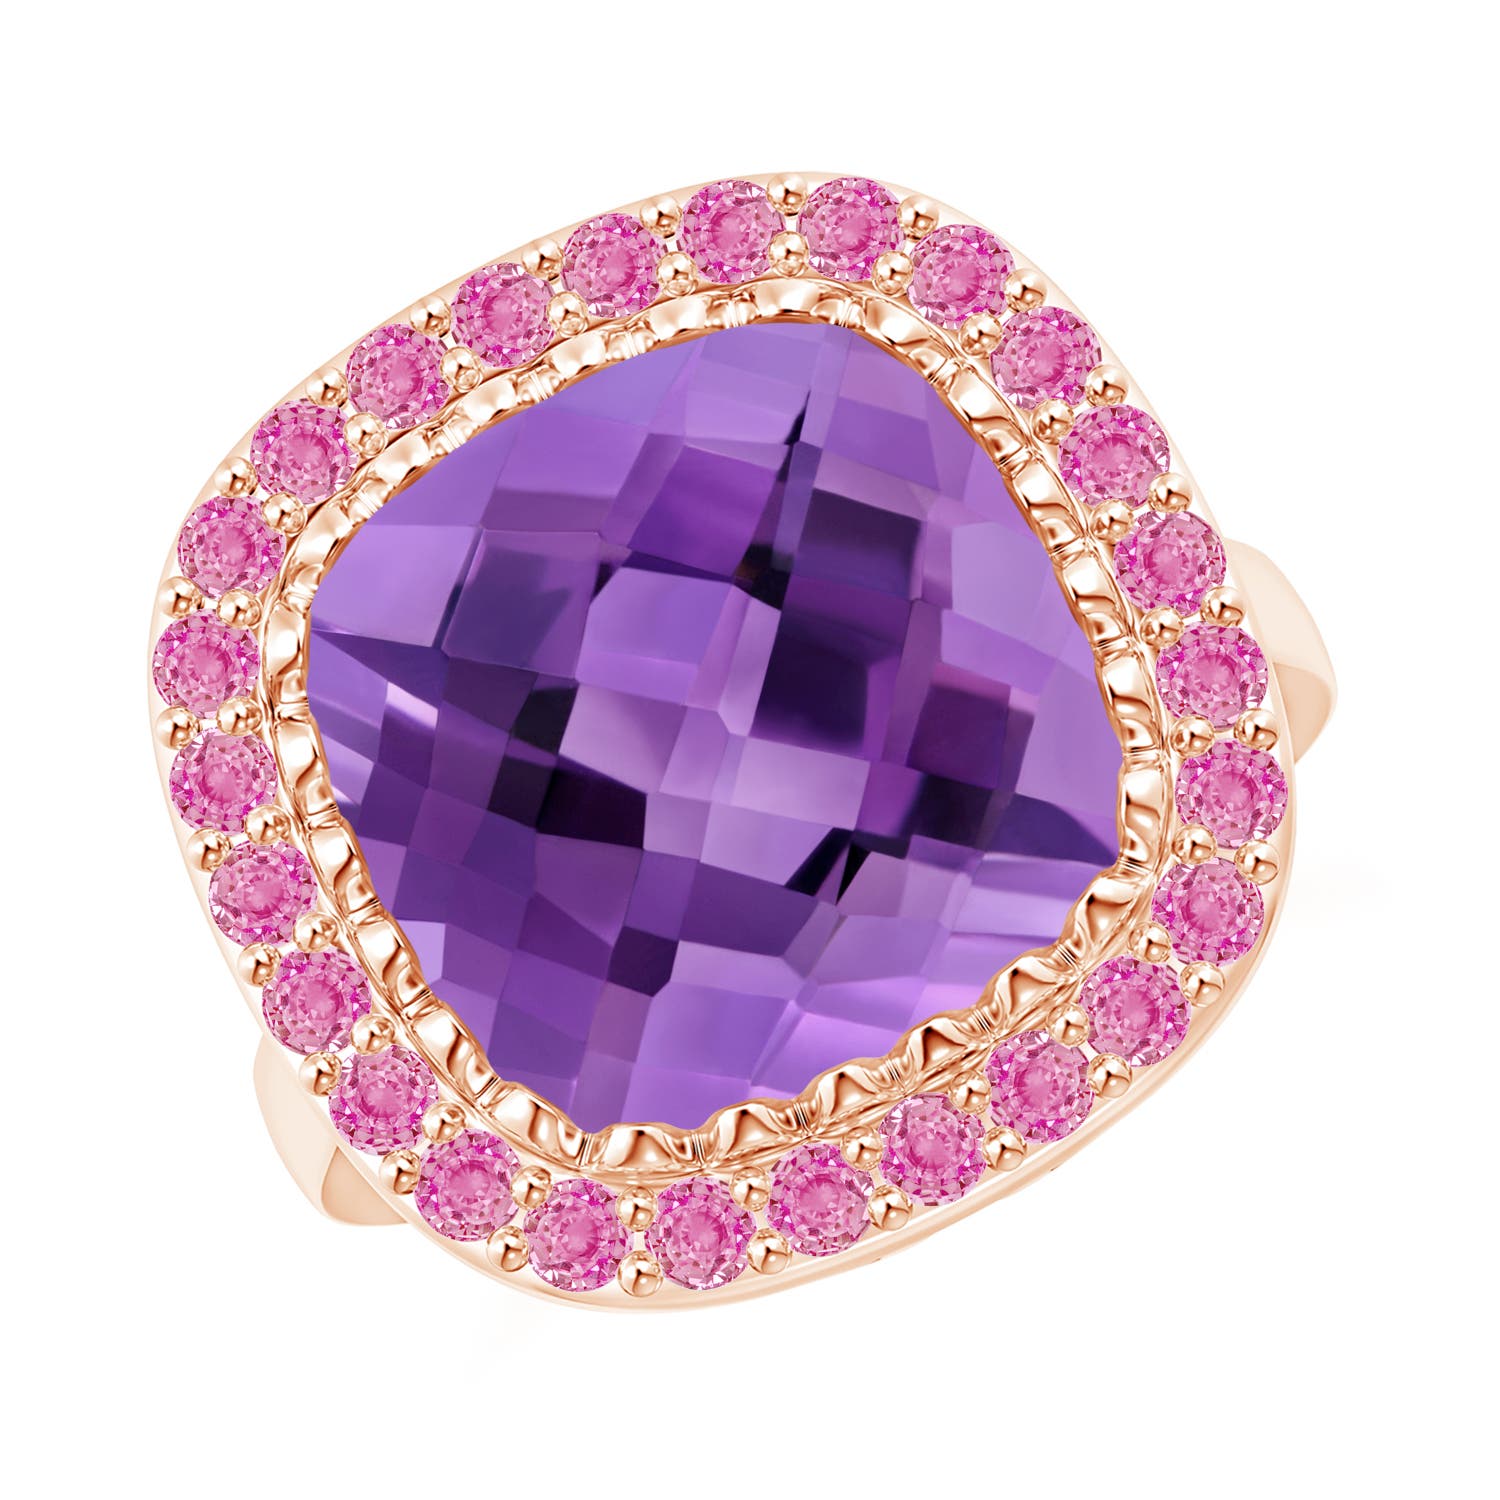 AA - Amethyst / 6.98 CT / 14 KT Rose Gold